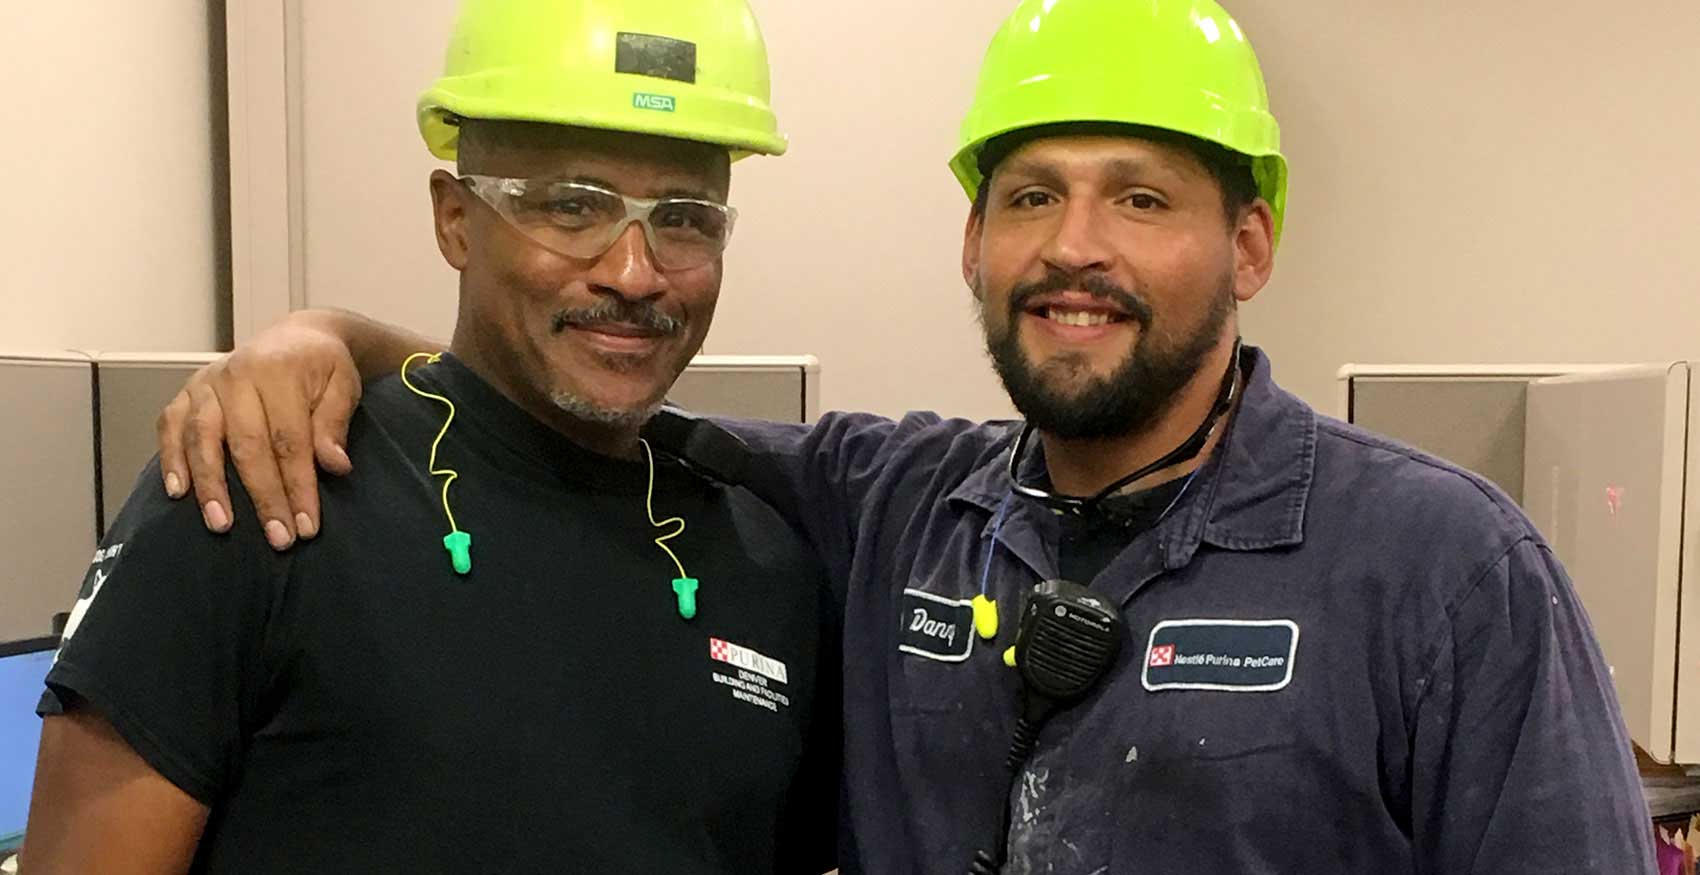 Two men smiling with hard hats on